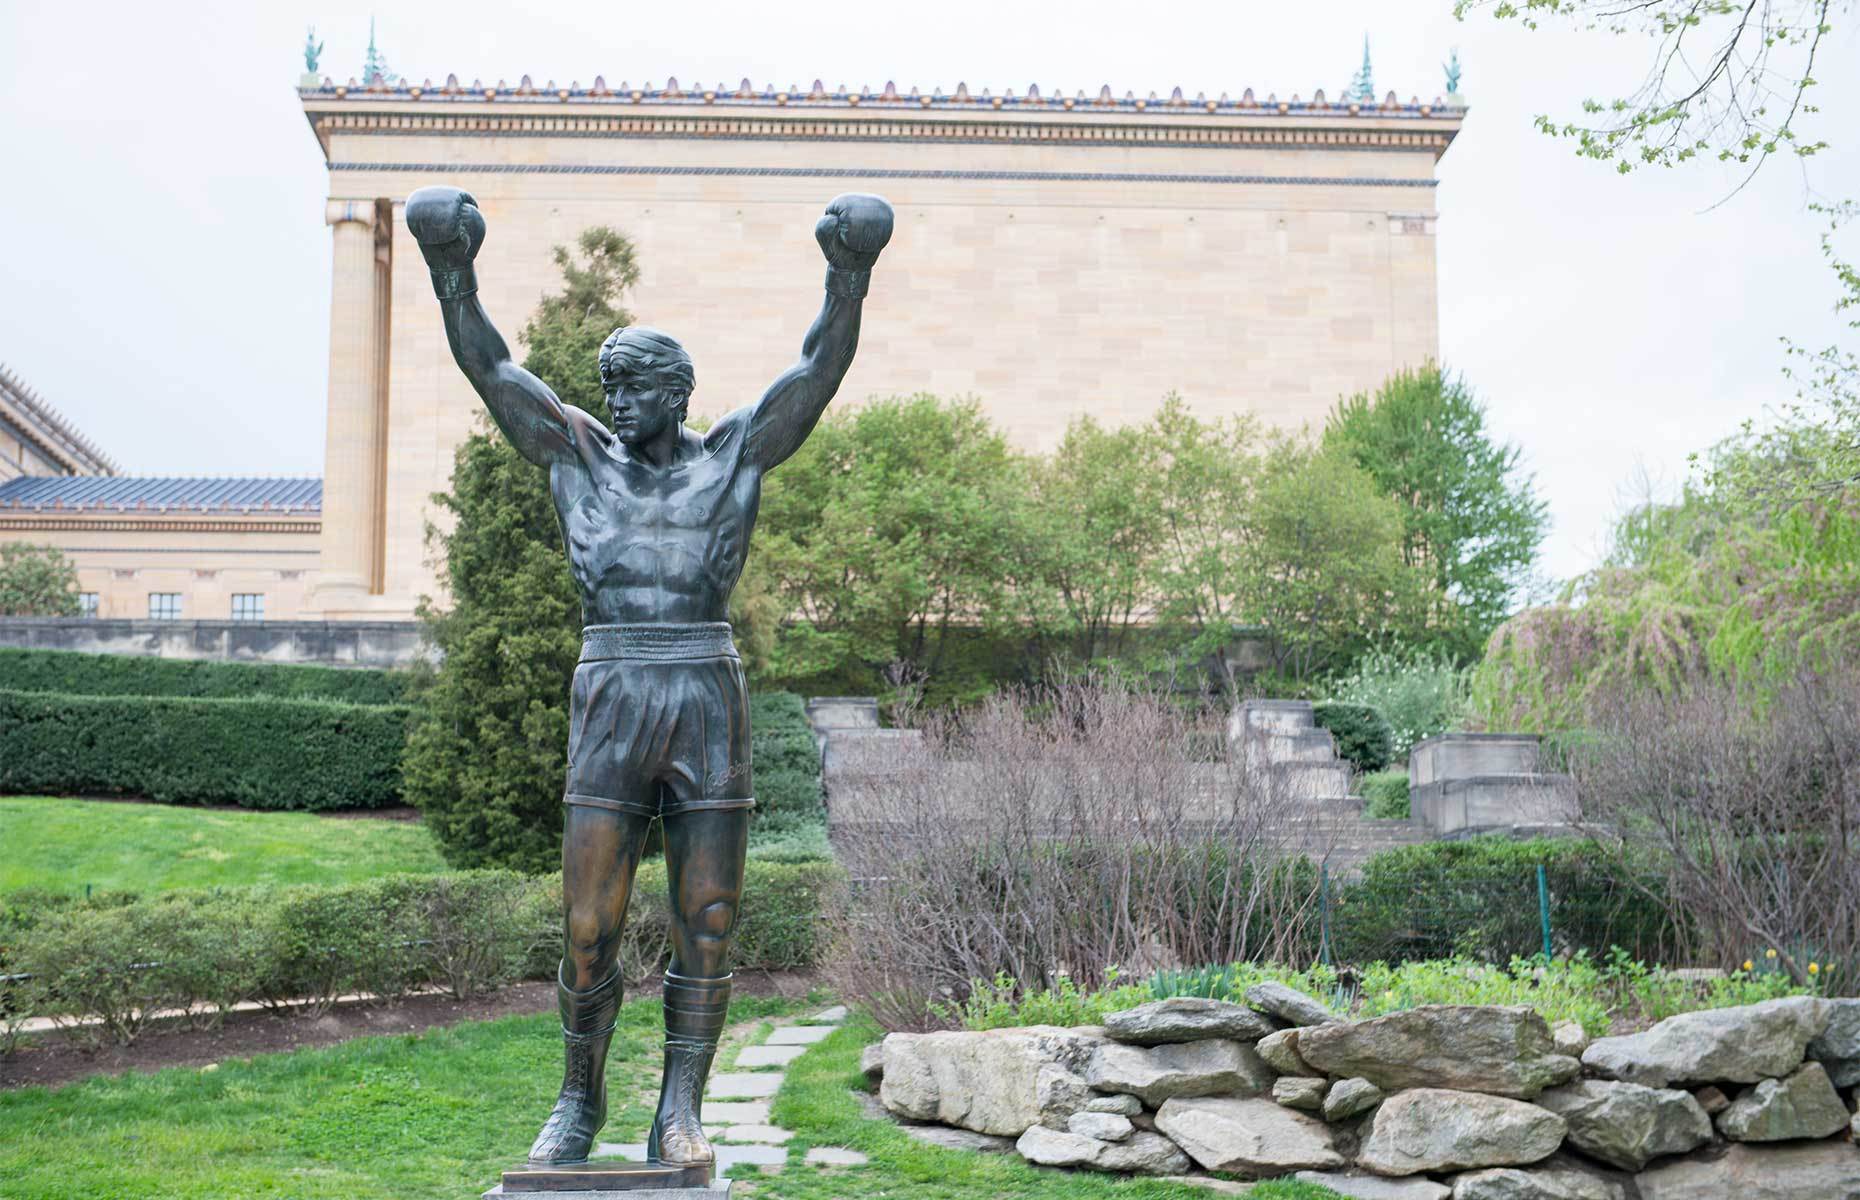 <p class="p1"><span>The 72 steps leading to the southern facade of the <a href="https://philamuseum.org/" rel="noreferrer noopener"><span>Philadelphia Museum of Art</span></a> were made famous when the well-known character Rocky (played by Sylvester Stallone) ran to the top before raising his arms in victory. Immortalize your own climb during your next visit.</span></p>